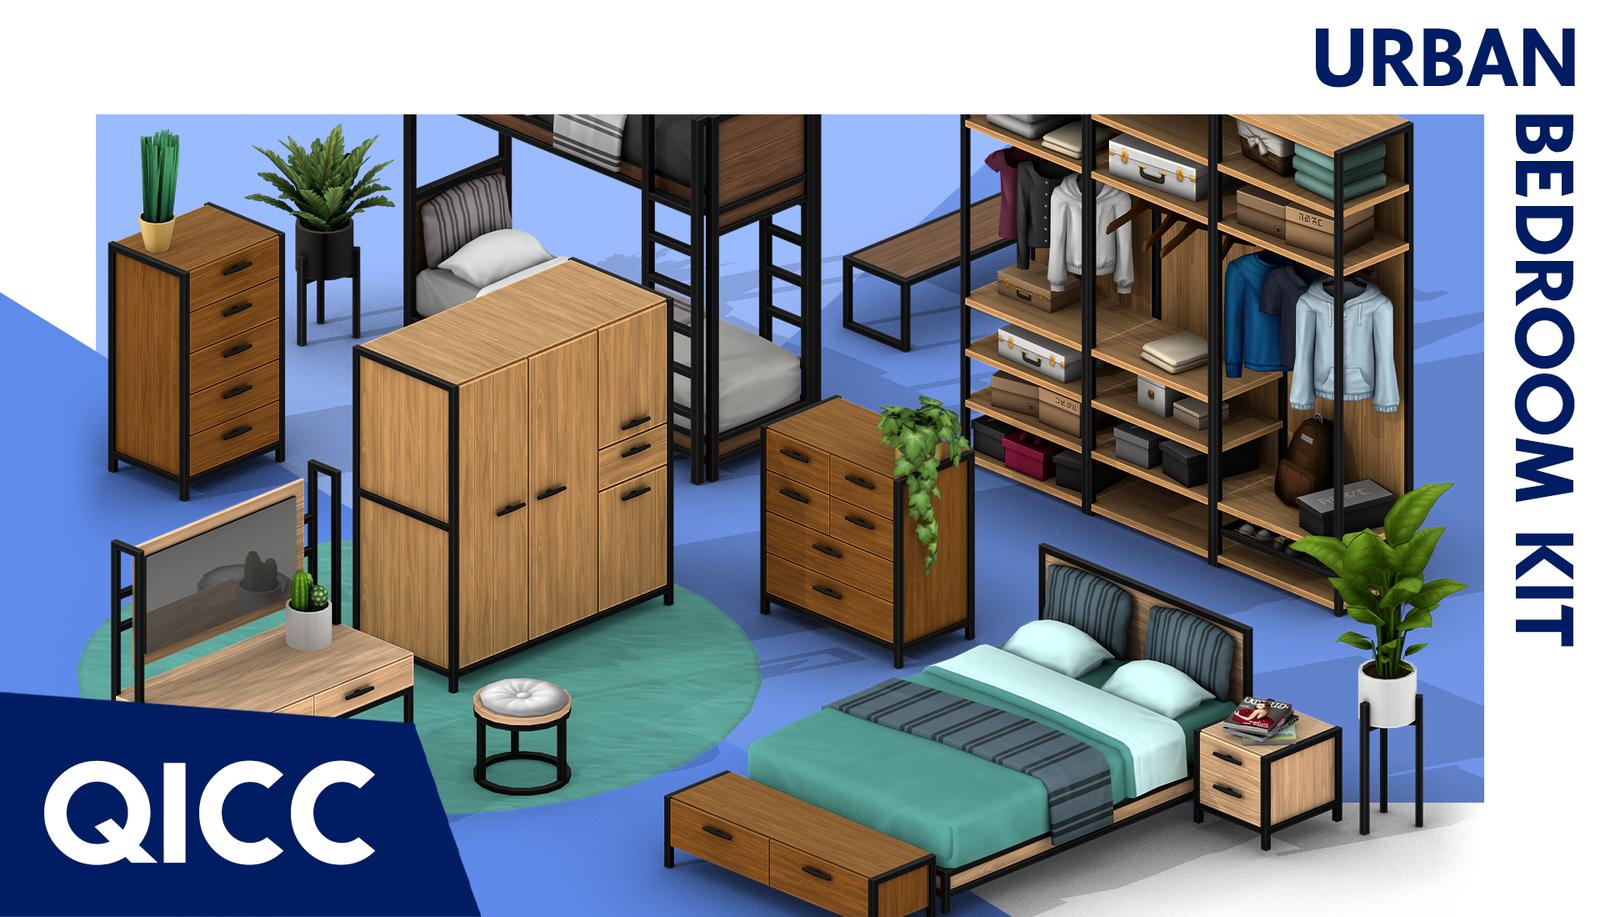 urban bedroom kit quirky introvert cc